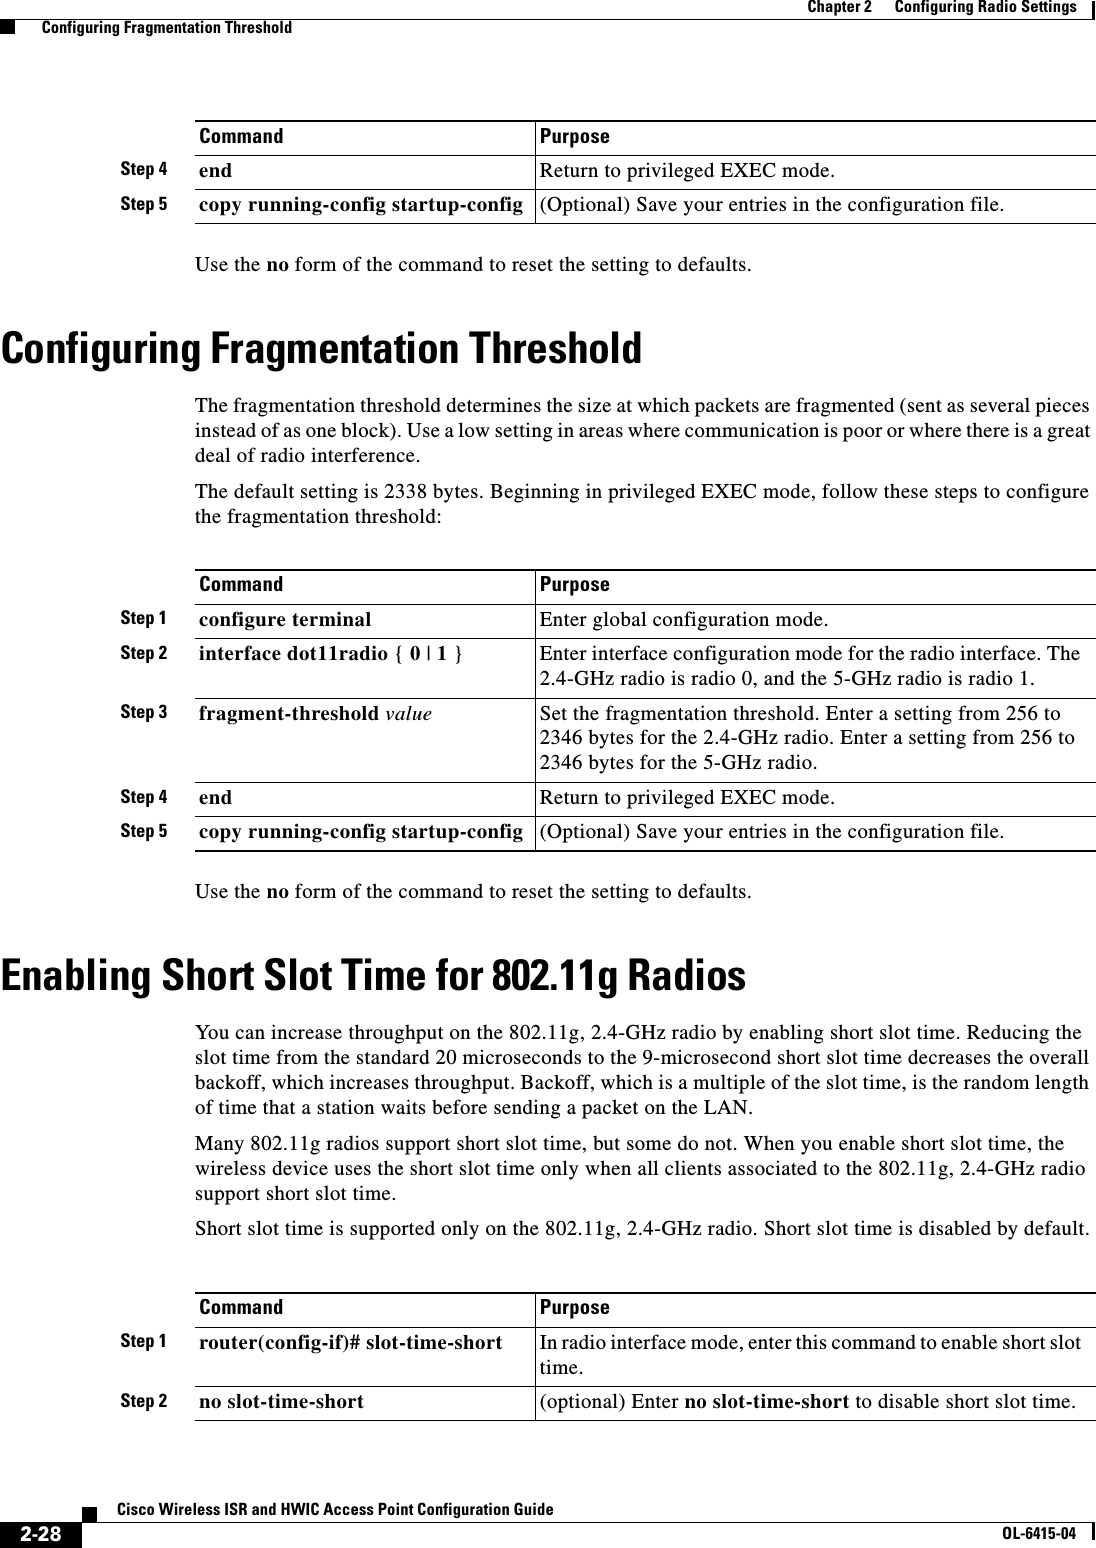  2-28Cisco Wireless ISR and HWIC Access Point Configuration GuideOL-6415-04Chapter 2      Configuring Radio Settings  Configuring Fragmentation ThresholdUse the no form of the command to reset the setting to defaults.Configuring Fragmentation ThresholdThe fragmentation threshold determines the size at which packets are fragmented (sent as several pieces instead of as one block). Use a low setting in areas where communication is poor or where there is a great deal of radio interference.The default setting is 2338 bytes. Beginning in privileged EXEC mode, follow these steps to configure the fragmentation threshold:Use the no form of the command to reset the setting to defaults.Enabling Short Slot Time for 802.11g RadiosYou can increase throughput on the 802.11g, 2.4-GHz radio by enabling short slot time. Reducing the slot time from the standard 20 microseconds to the 9-microsecond short slot time decreases the overall backoff, which increases throughput. Backoff, which is a multiple of the slot time, is the random length of time that a station waits before sending a packet on the LAN.Many 802.11g radios support short slot time, but some do not. When you enable short slot time, the wireless device uses the short slot time only when all clients associated to the 802.11g, 2.4-GHz radio support short slot time.Short slot time is supported only on the 802.11g, 2.4-GHz radio. Short slot time is disabled by default.Step 4 end Return to privileged EXEC mode.Step 5 copy running-config startup-config (Optional) Save your entries in the configuration file.Command PurposeCommand PurposeStep 1 configure terminal Enter global configuration mode.Step 2 interface dot11radio { 0 | 1 }Enter interface configuration mode for the radio interface. The 2.4-GHz radio is radio 0, and the 5-GHz radio is radio 1.Step 3 fragment-threshold value Set the fragmentation threshold. Enter a setting from 256 to 2346 bytes for the 2.4-GHz radio. Enter a setting from 256 to 2346 bytes for the 5-GHz radio. Step 4 end Return to privileged EXEC mode.Step 5 copy running-config startup-config (Optional) Save your entries in the configuration file.Command PurposeStep 1 router(config-if)# slot-time-short In radio interface mode, enter this command to enable short slot time.Step 2 no slot-time-short (optional) Enter no slot-time-short to disable short slot time.